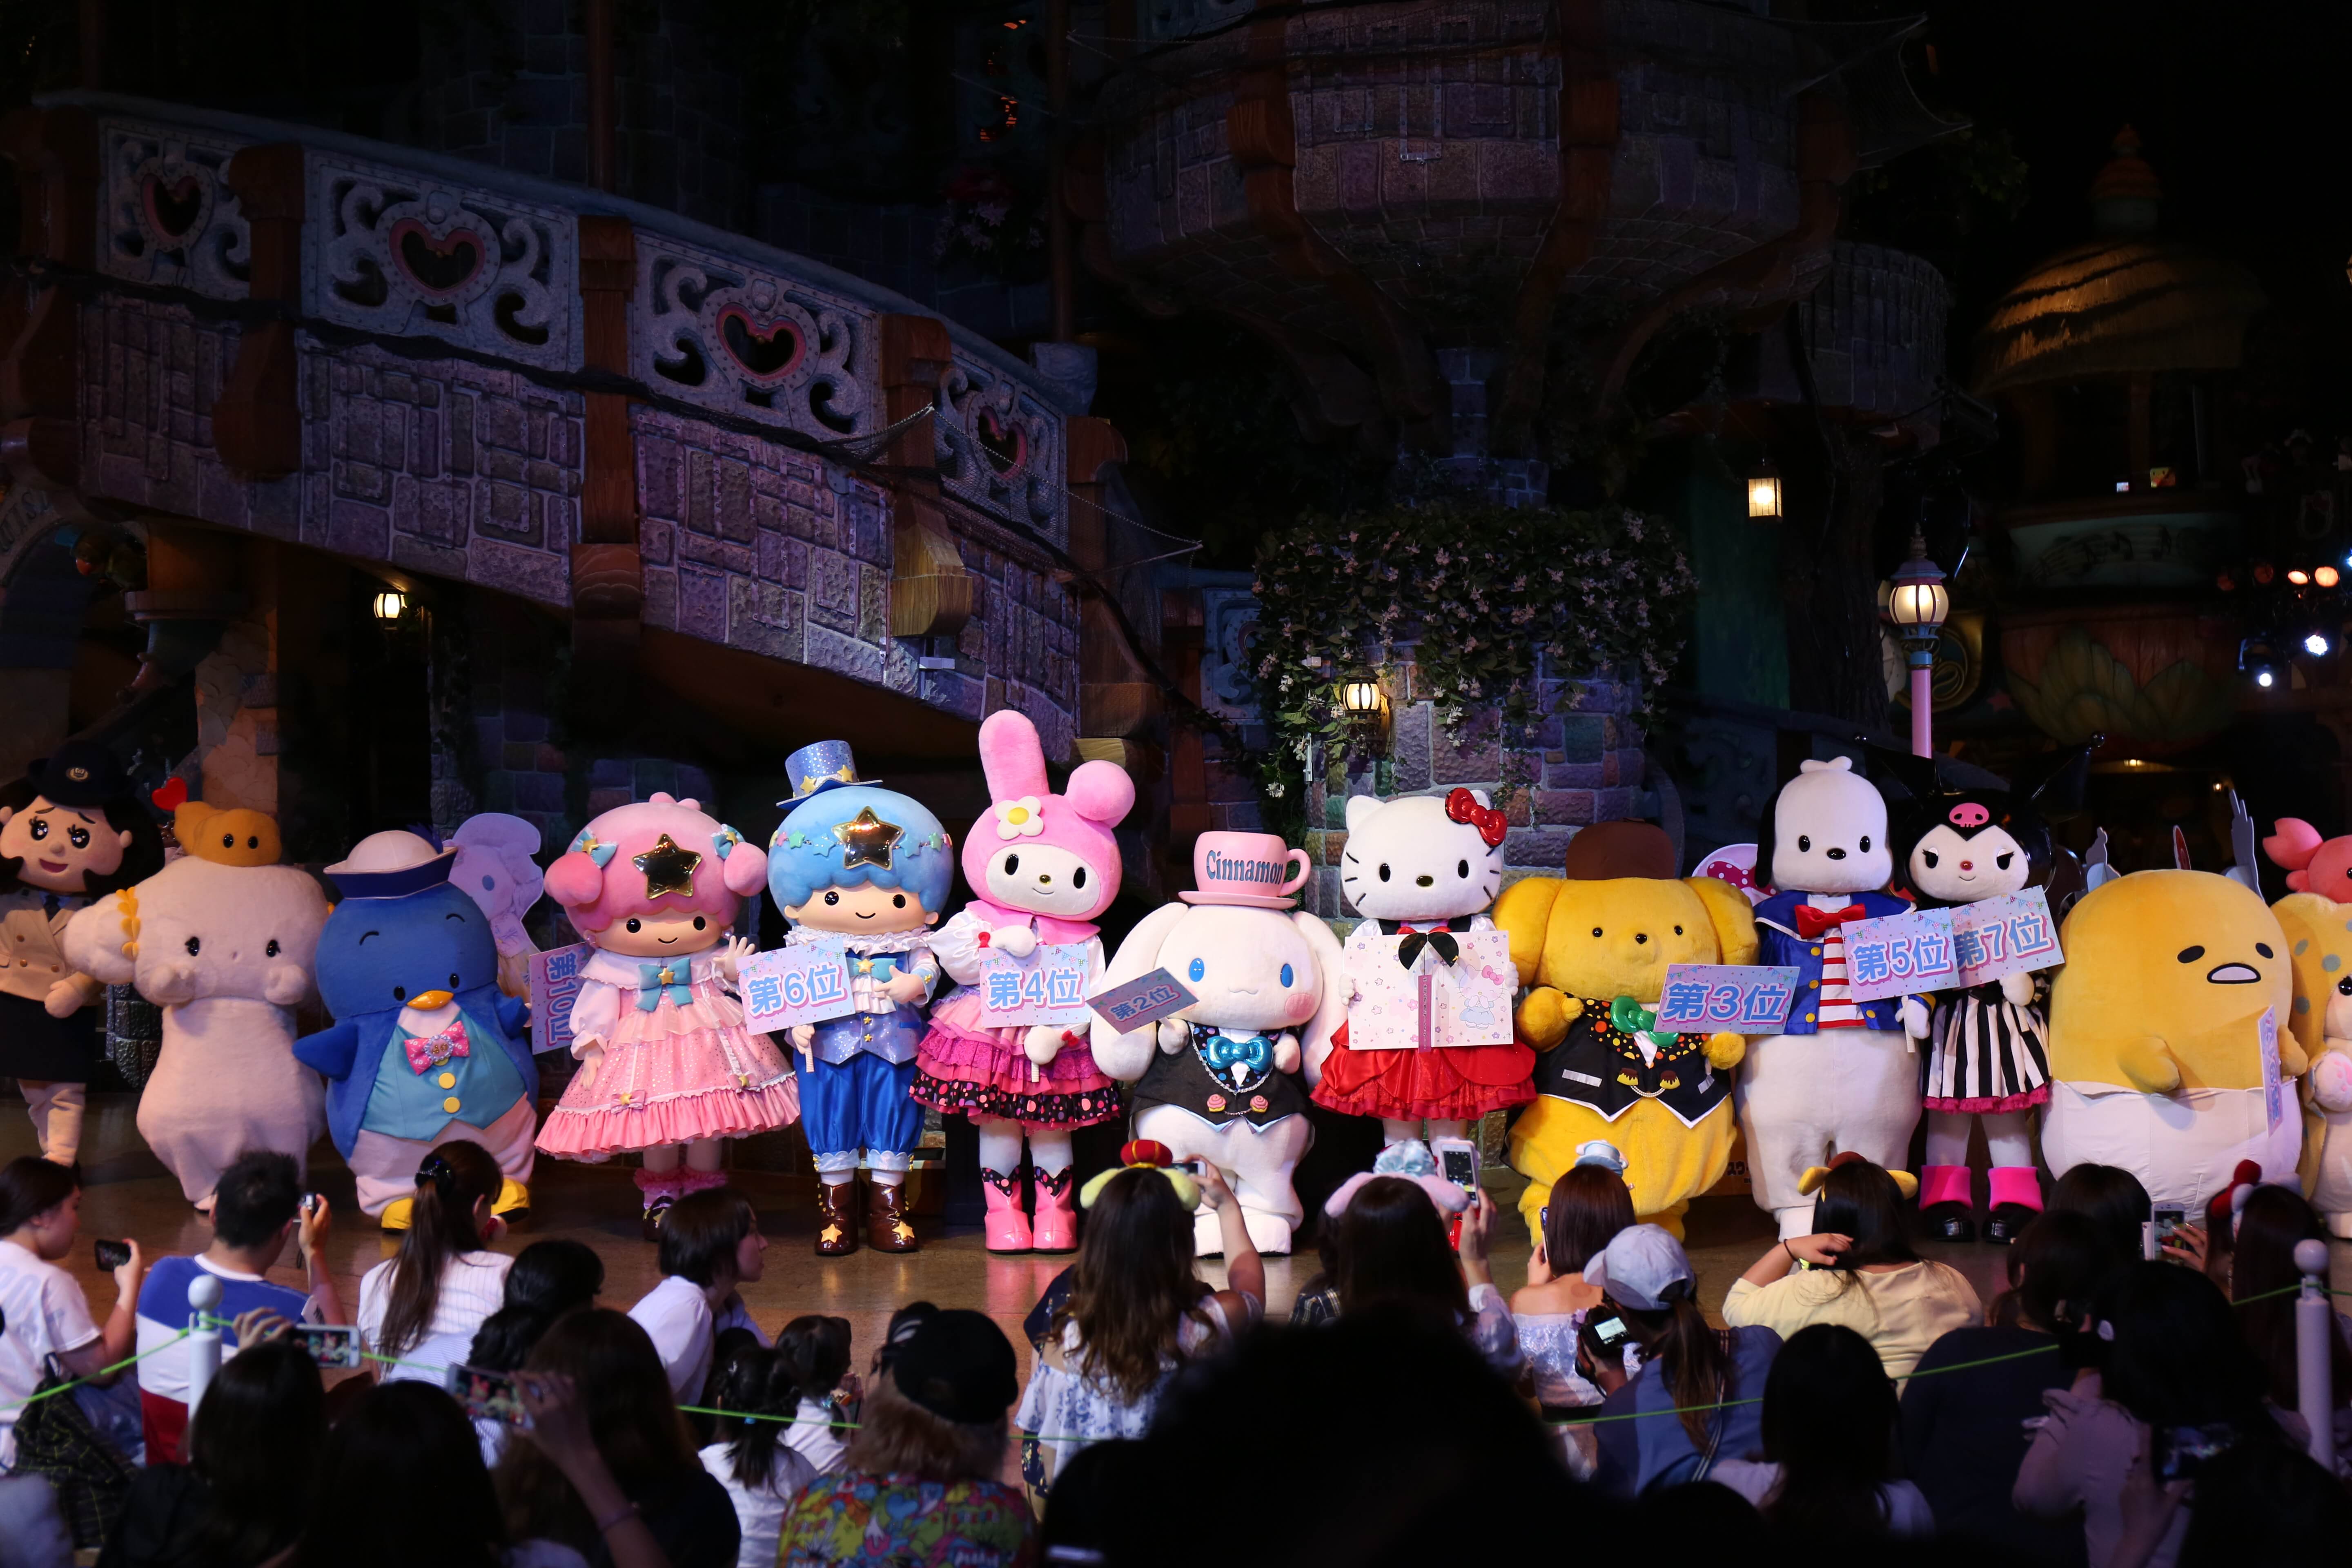 Spot your favourite Sanrio character? Remember to vote for them in